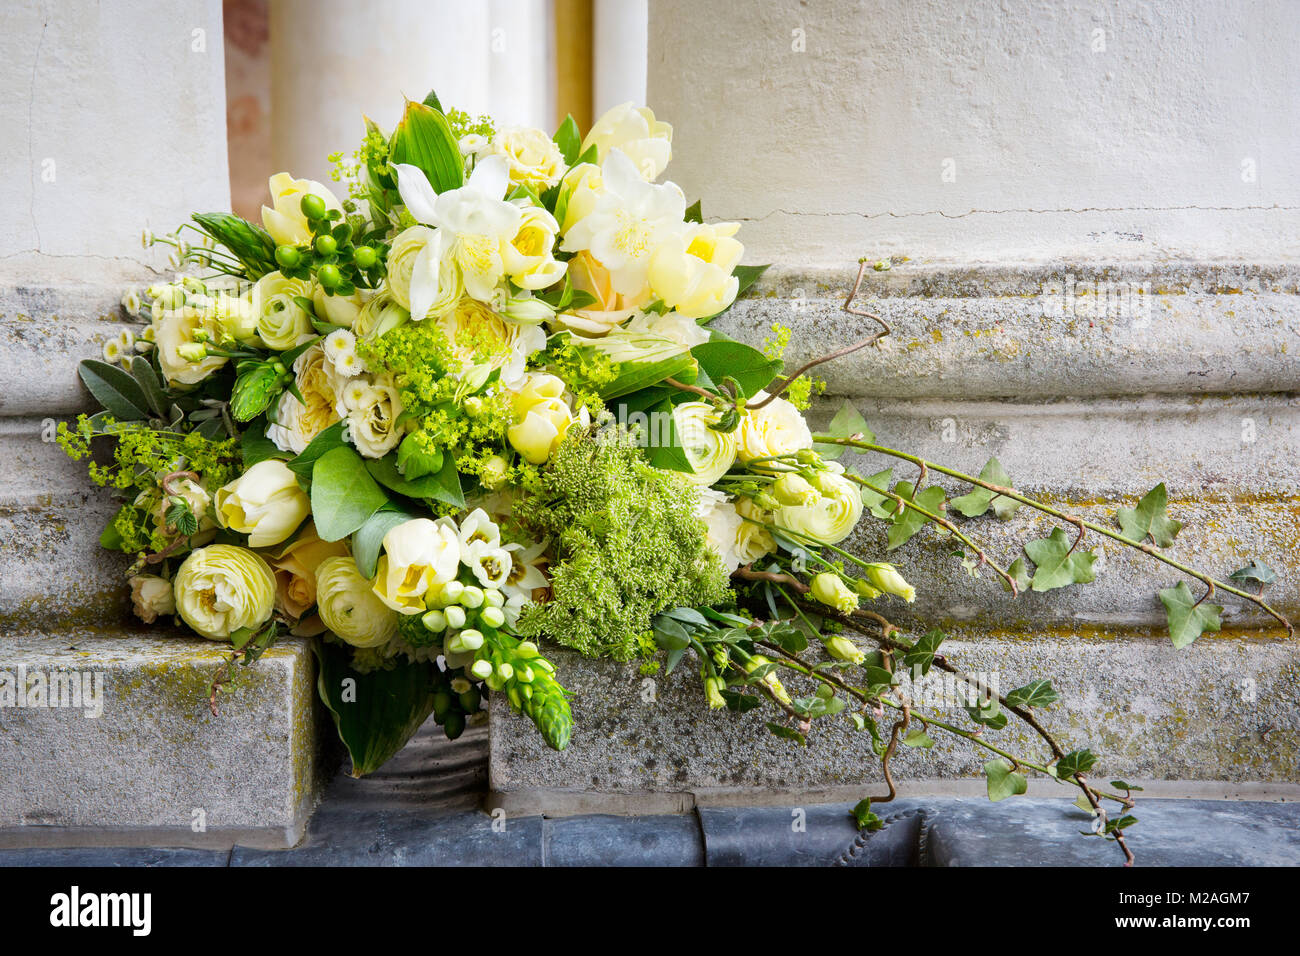 Cream and green floral arrangement set into wall Stock Photo